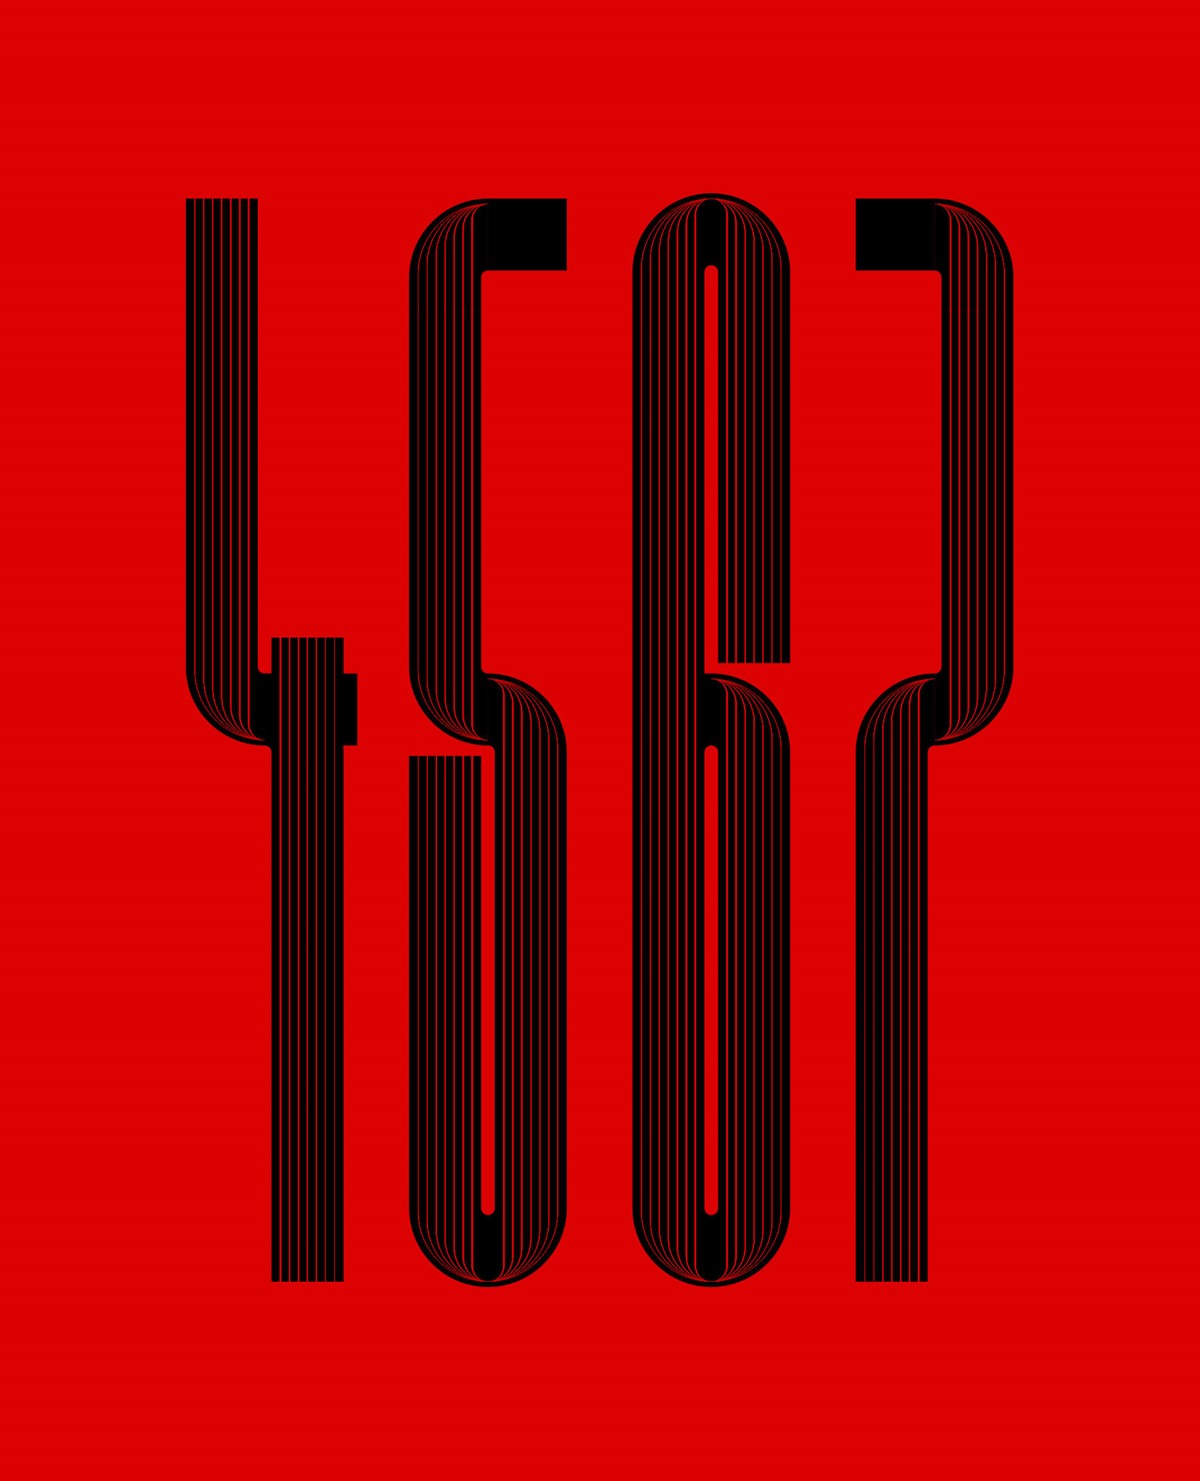 1896. Type experiment. Vertical 4-7. Bespoke typography design by Superfried.